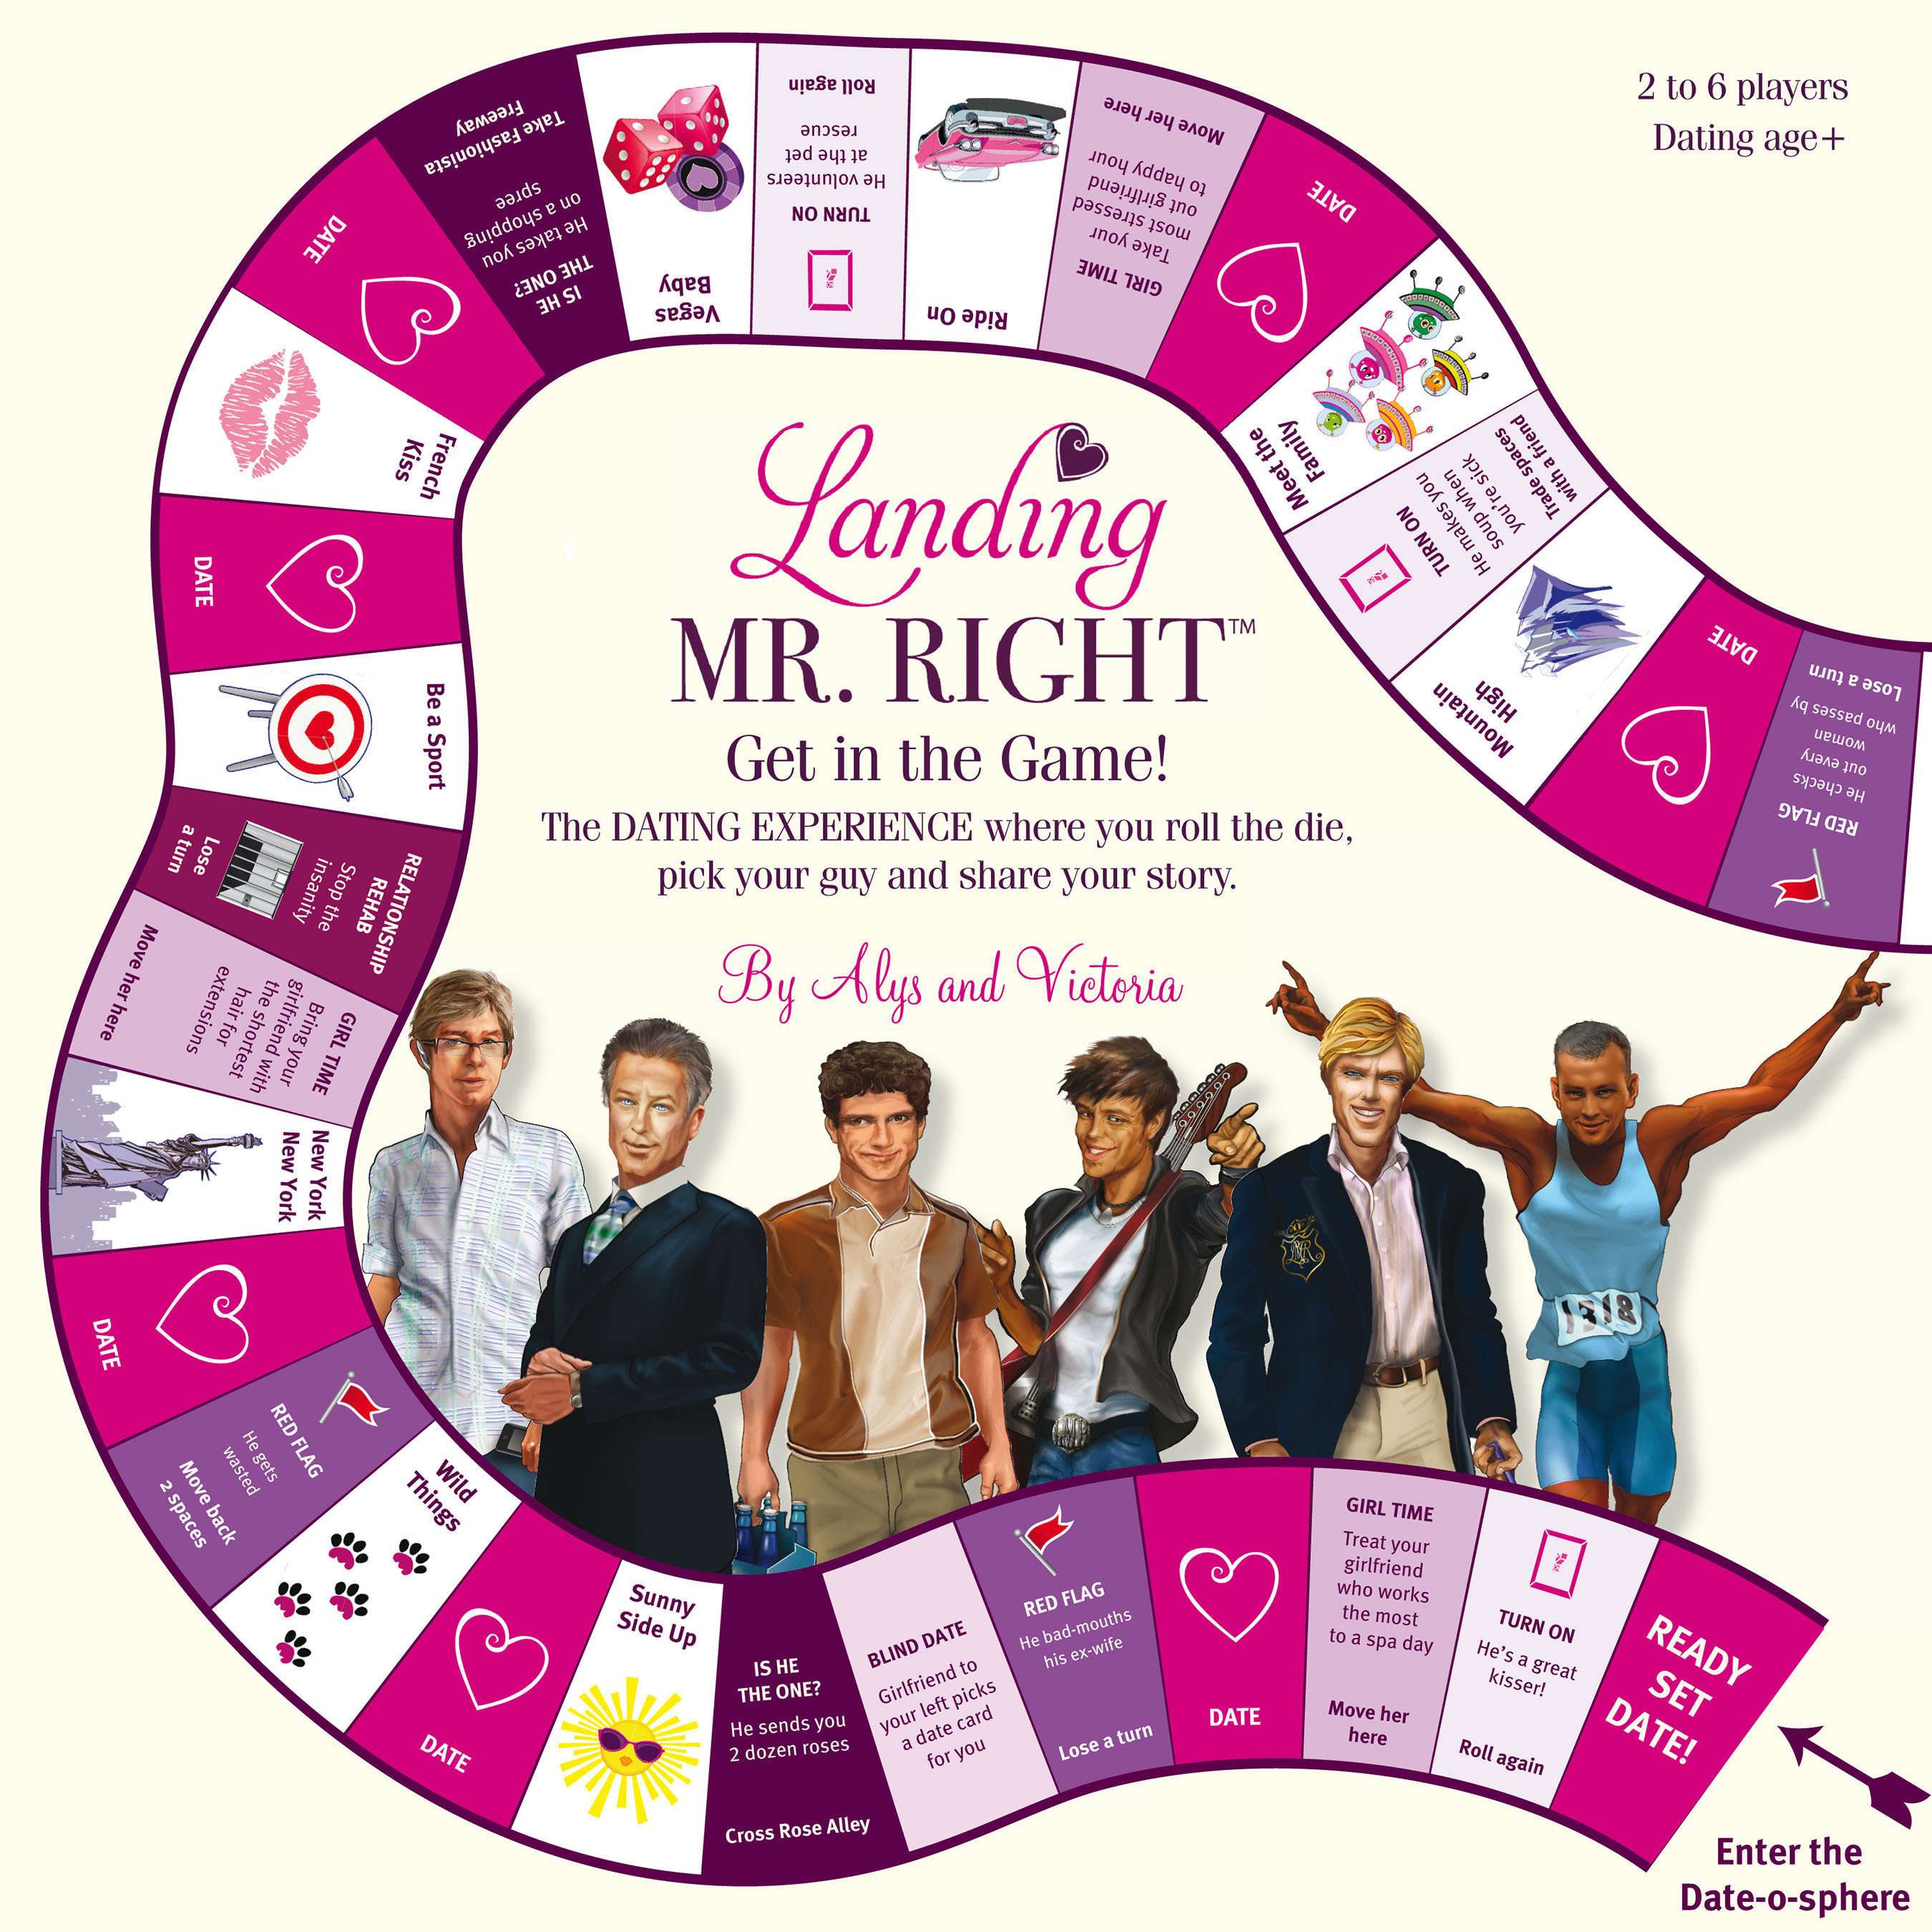 Landing Mr. Right is a hilarious NEW board game for single women in pursuit of "the One." The game, which has just launched in time for Valentine's Day, was created by Alys Daly and Victoria Brewer (both single) as a way to build confidence and friendship among women. Landing Mr. Right leads women on a virtual dating journey to find their own "Mr. Right." Along the way, they will have the opportunity to date six stereotypical men and will be asked to answer questions and share stories about their dating experiences. Landing Mr. Right is available for purchase on  www.landingmrright.com . (PRNewsFoto/Landing Mr. Right) (PRNewsFoto/LANDING MR. RIGHT)